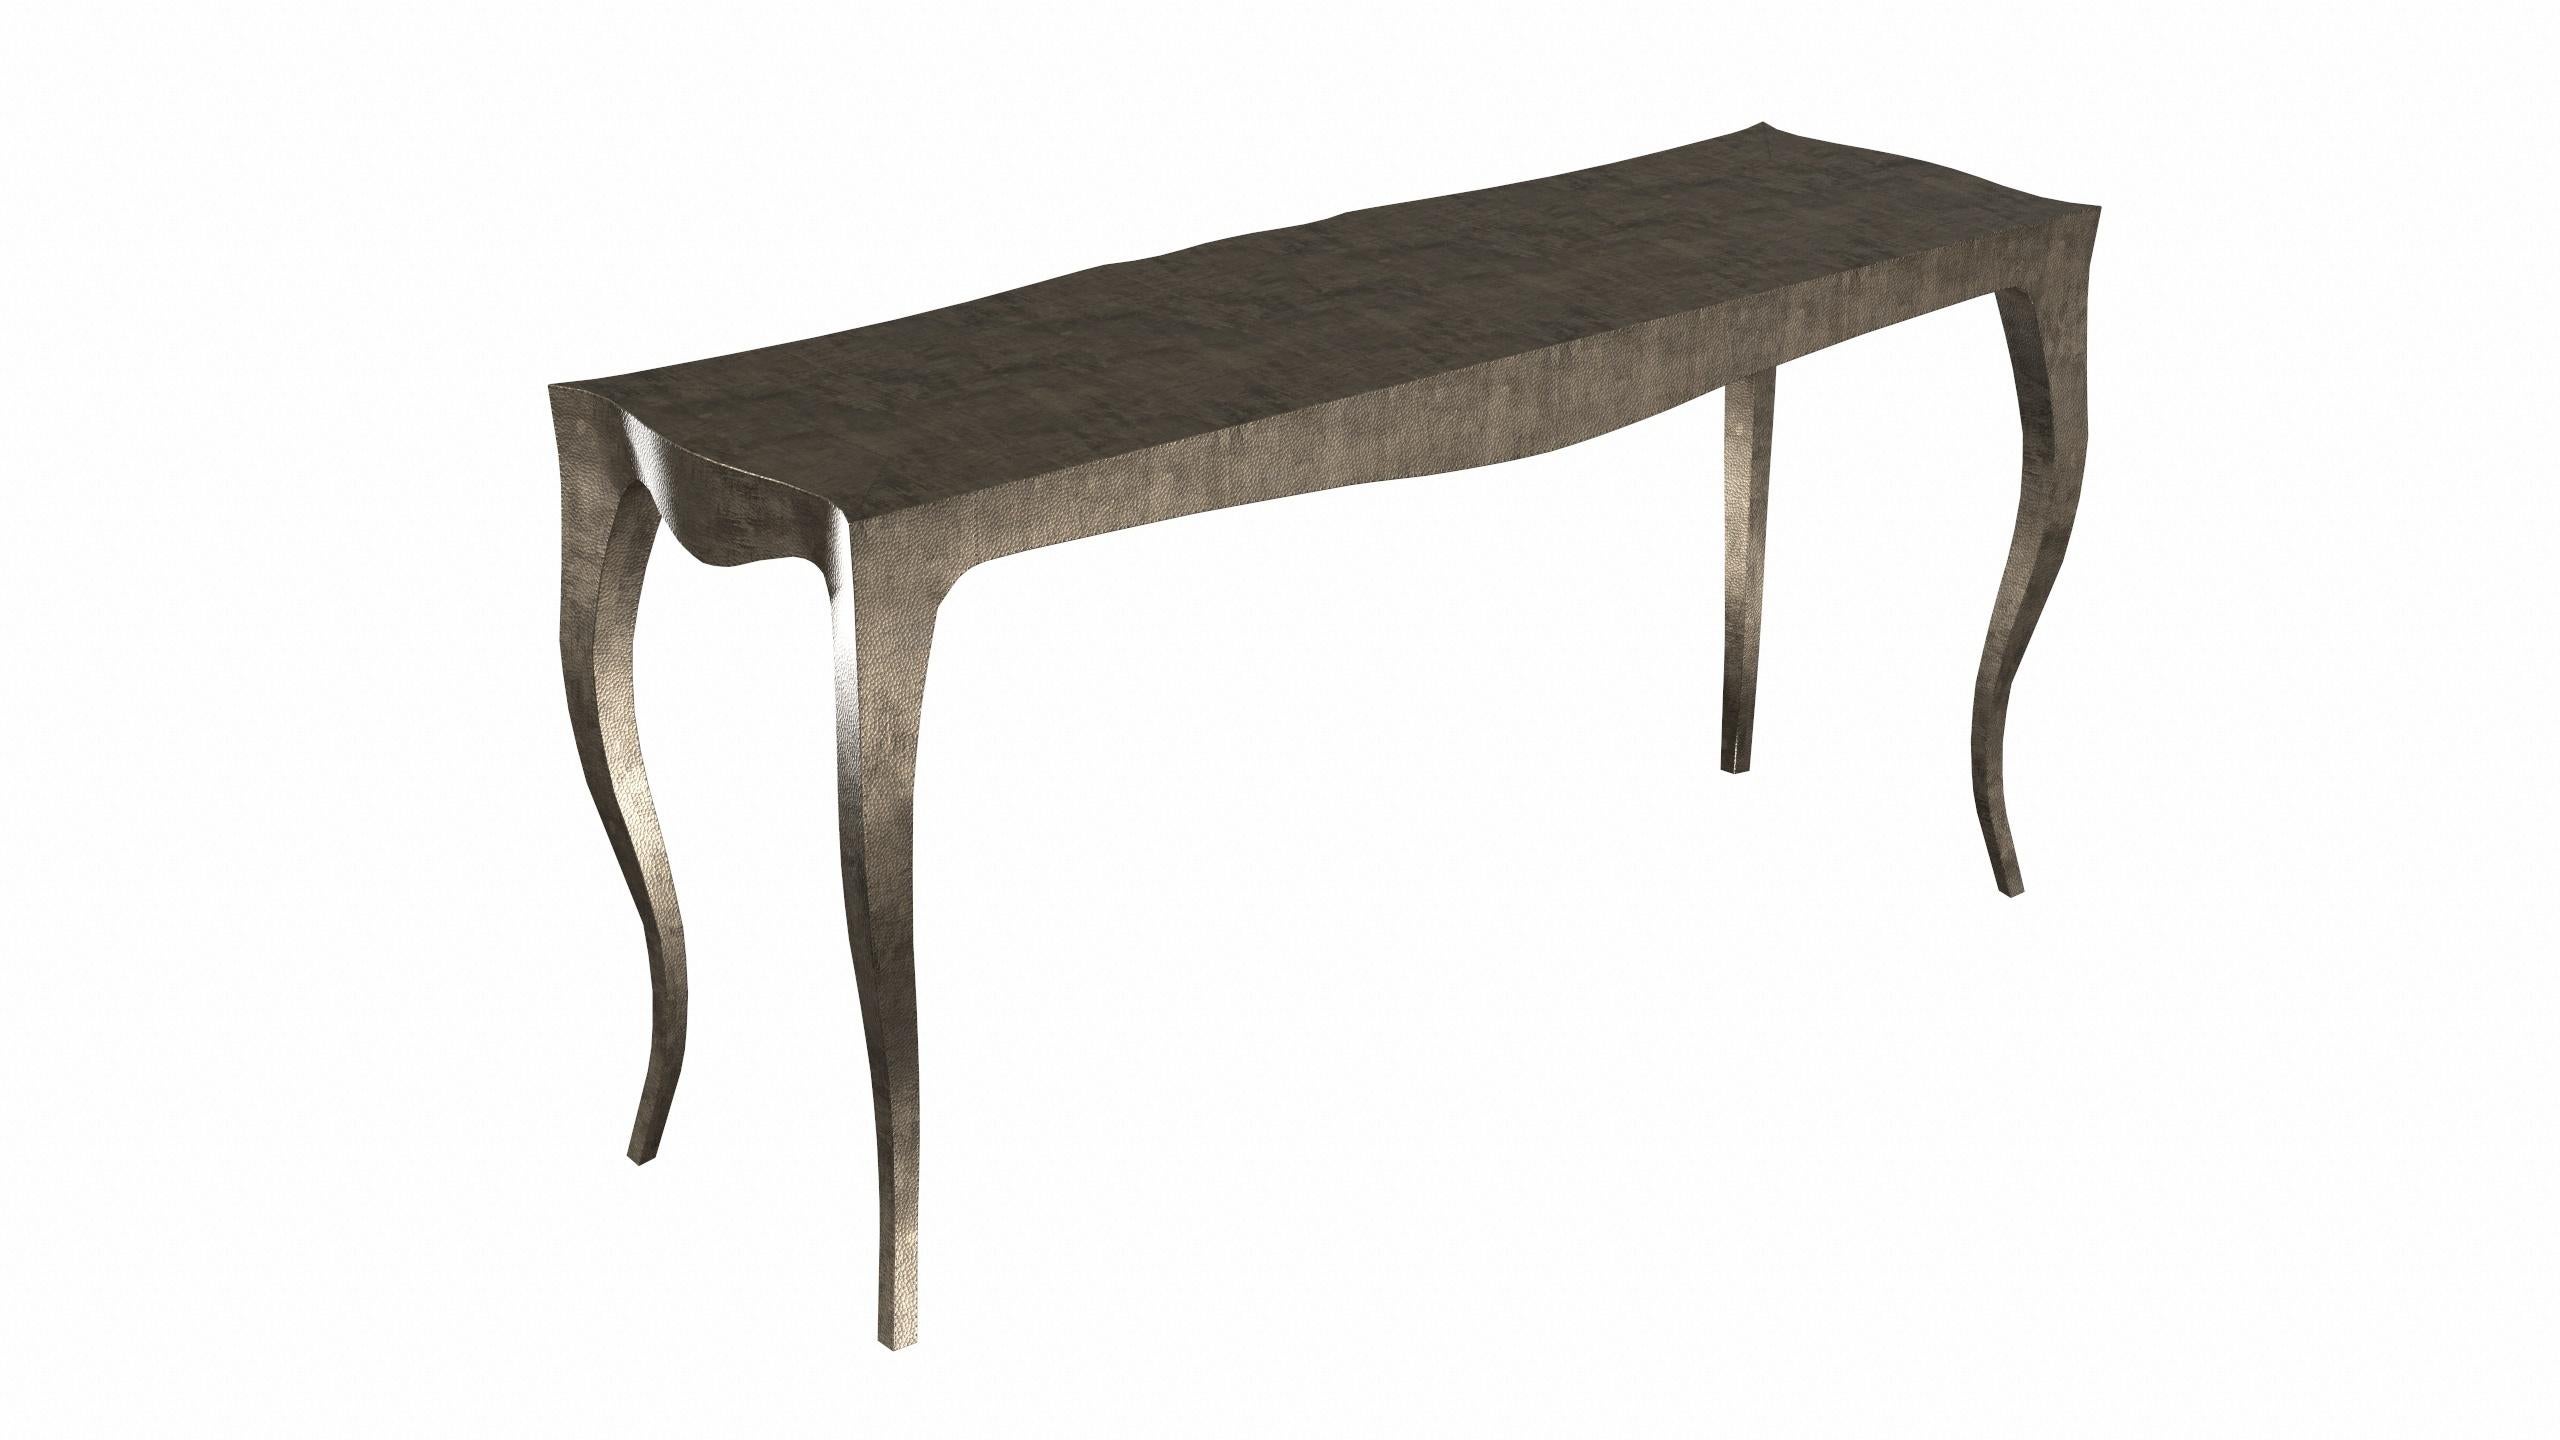 Wood Louise Console Art Deco Side Tables Mid. Hammered Antique Bronze by Paul Mathieu For Sale